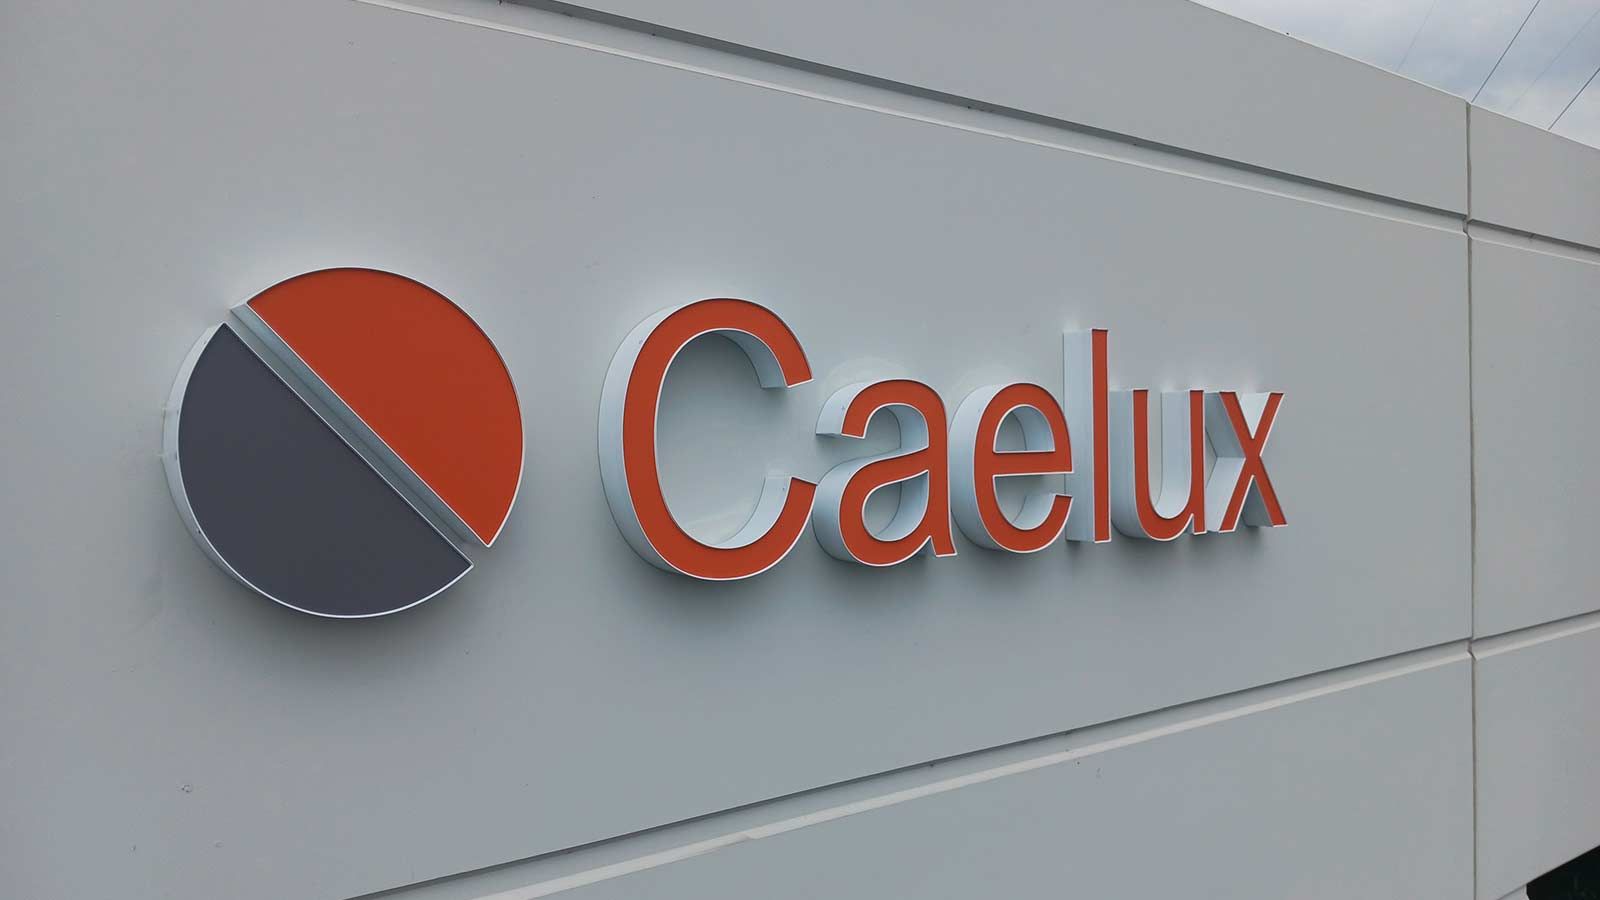 Caelux Corporation channel letters mounted on the building